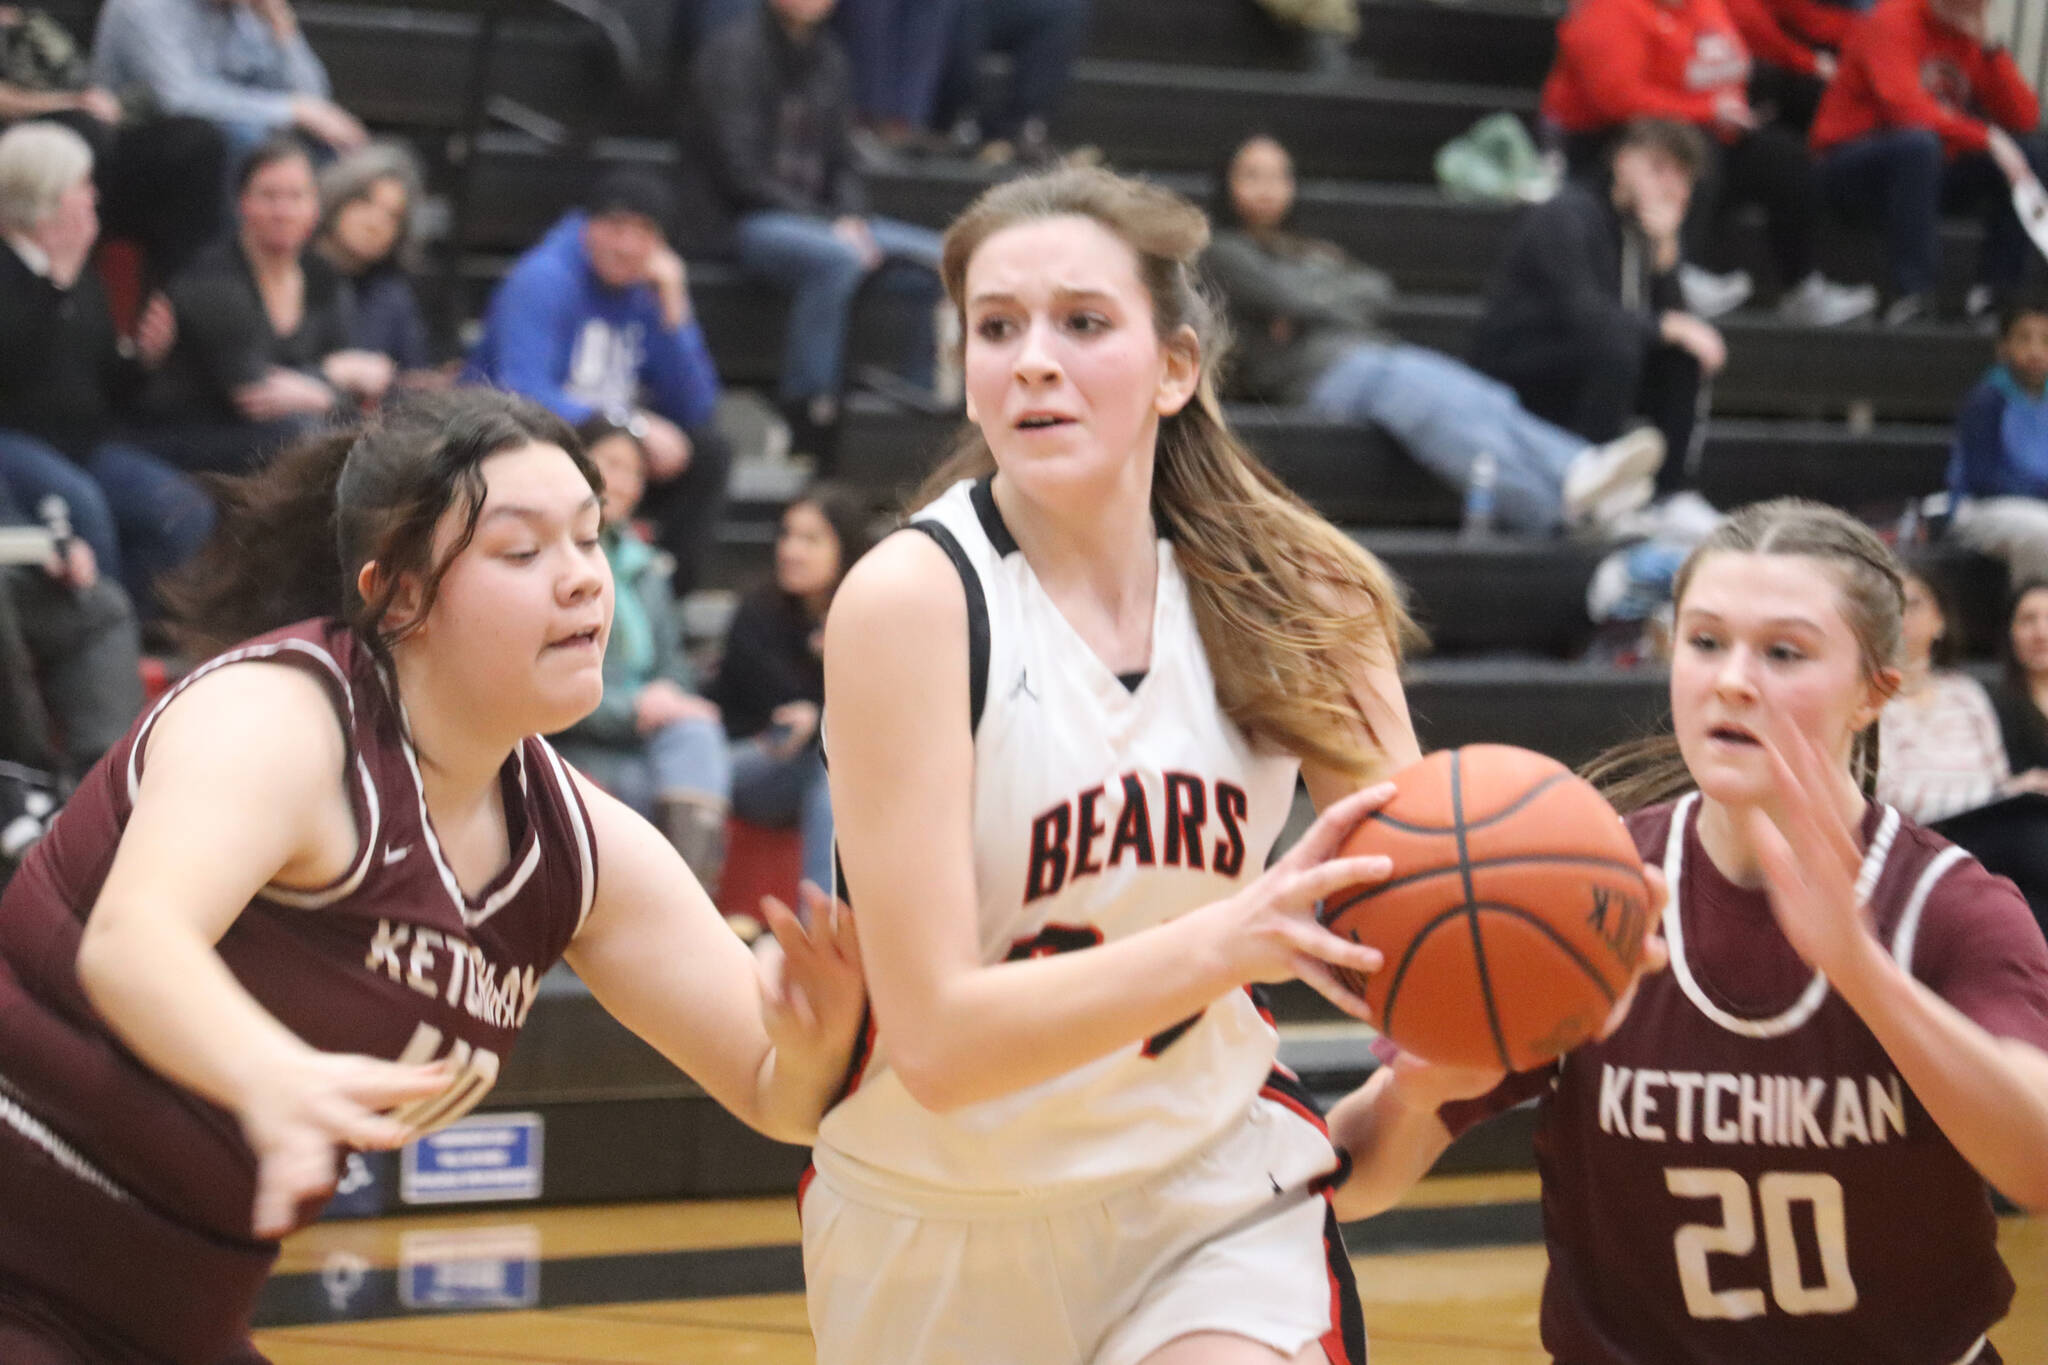 JDHS junior Mila Hargrave drives to the basket against Ketchikan on Saturday to help secure the win for the Bears, 43-29. Hargrave would lead in scores on Saturday with a total of 13 points. (Jonson Kuhn / Juneau Empire)